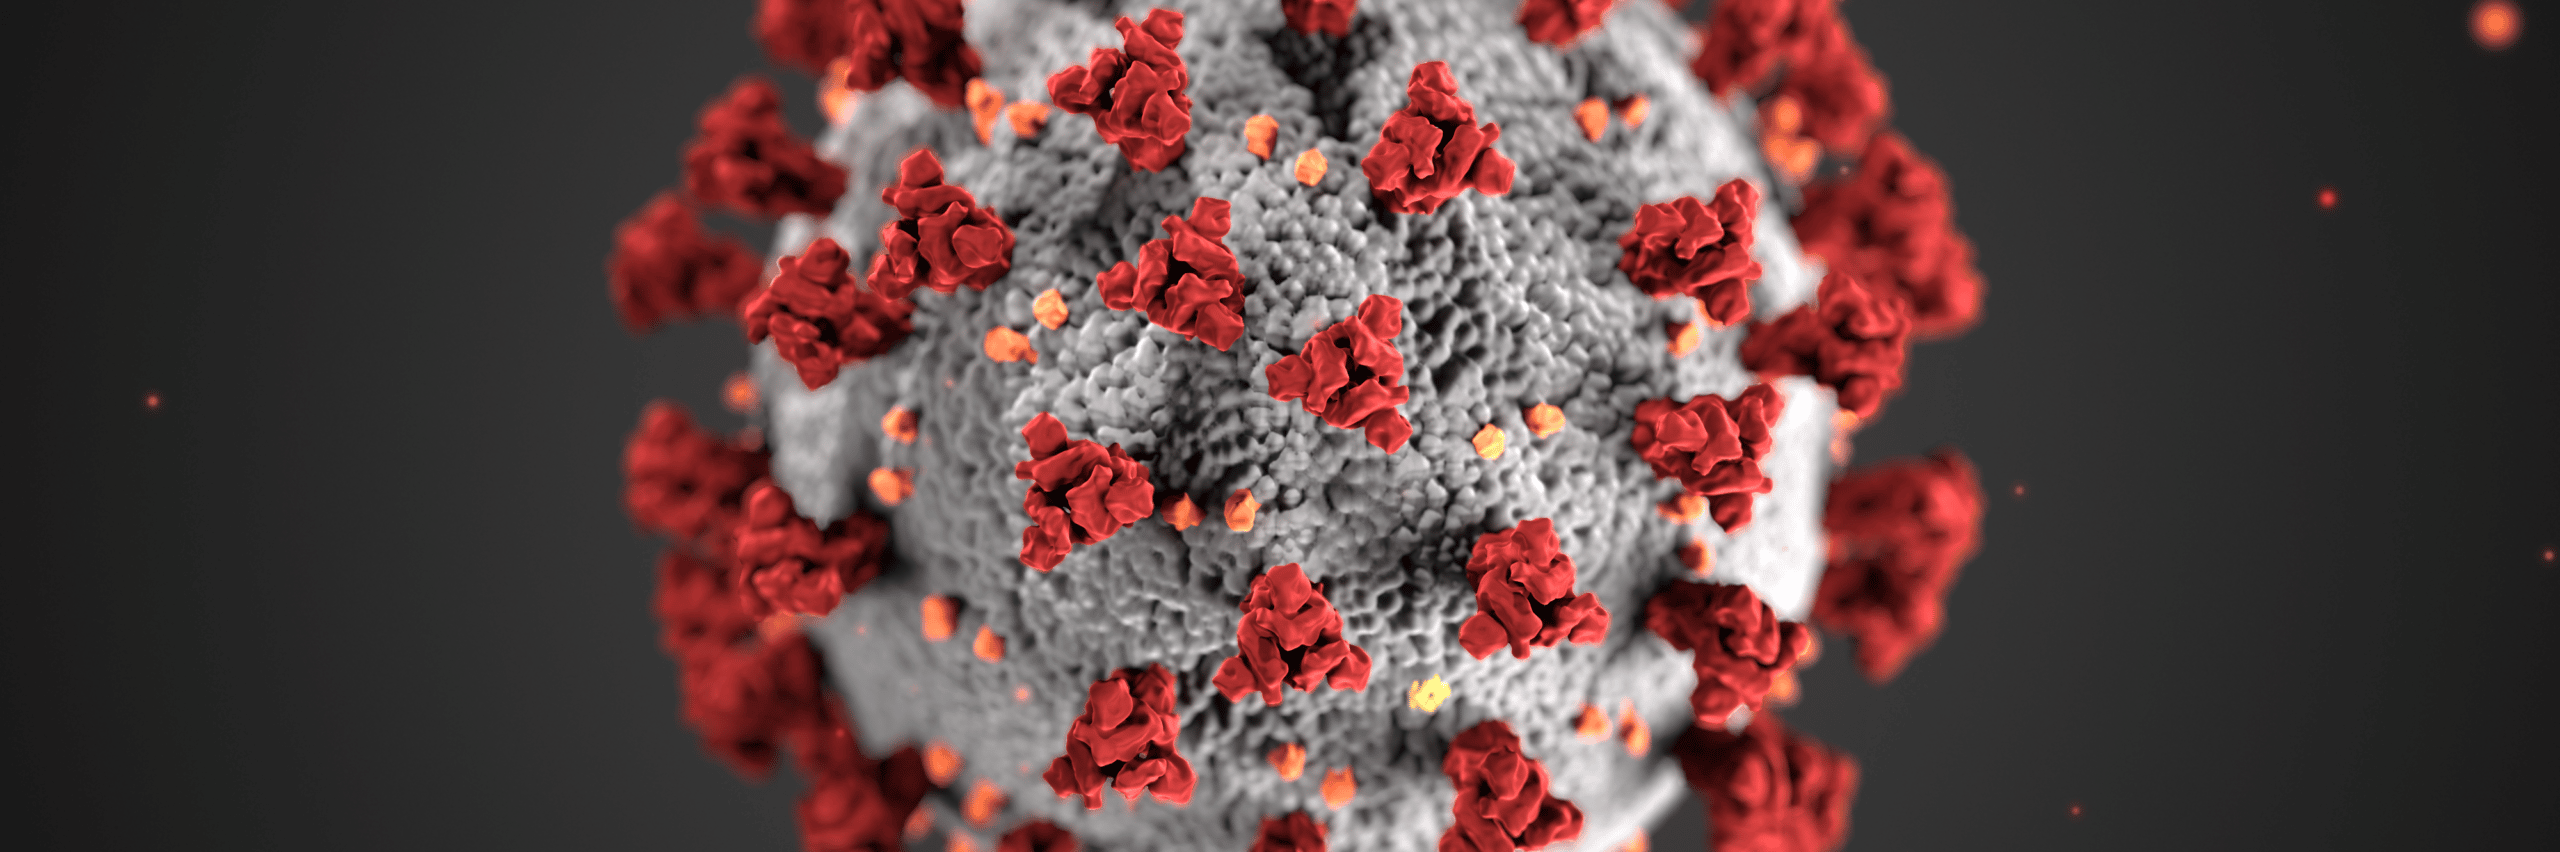 HIV Patients Exposed to A Higher Risk of Coronavirus Image